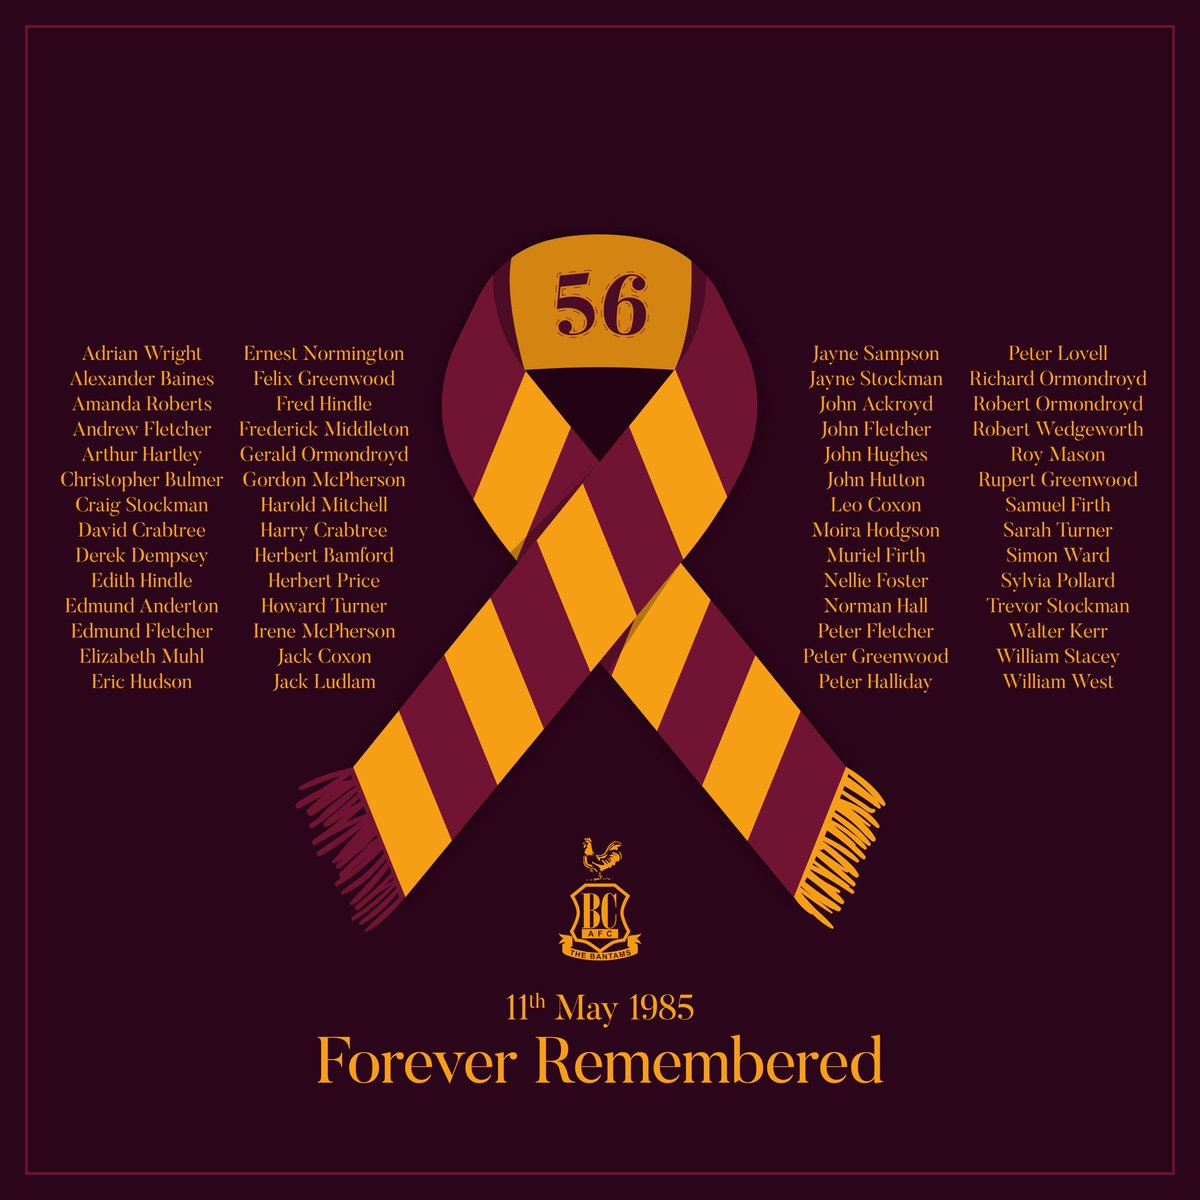 Like so many since they turned up to watch their team be crowned champions and celebrate promotion. Their lives ended so tragically in the most horrific of circumstances. RIP the 56 victims of the Bradford fire. Always remembered. Everyone should go home from a football match.